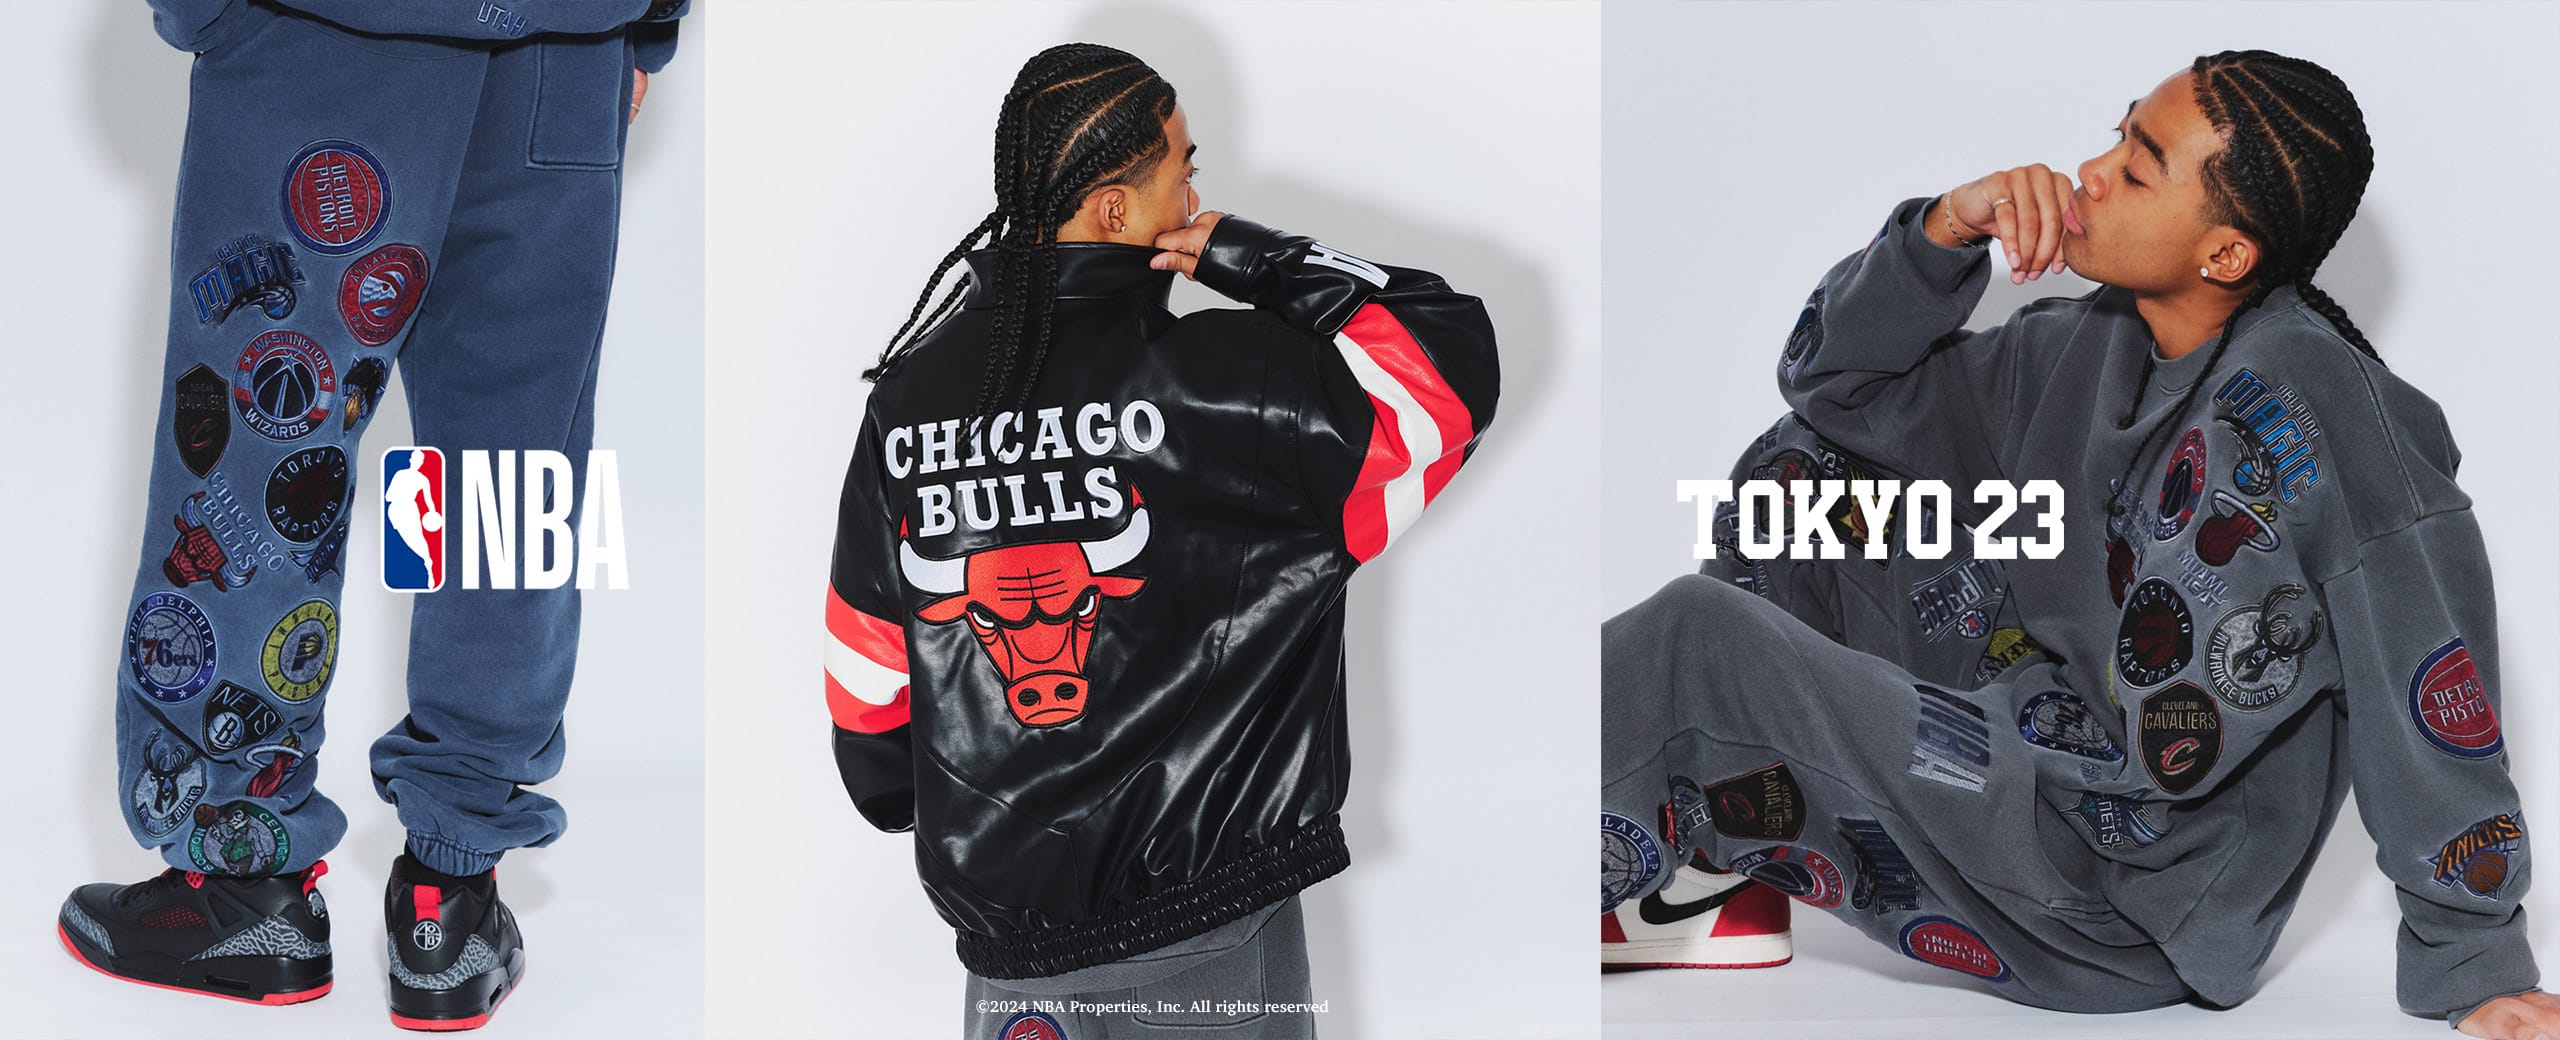 "NBA CAPSULE COLLECTION"